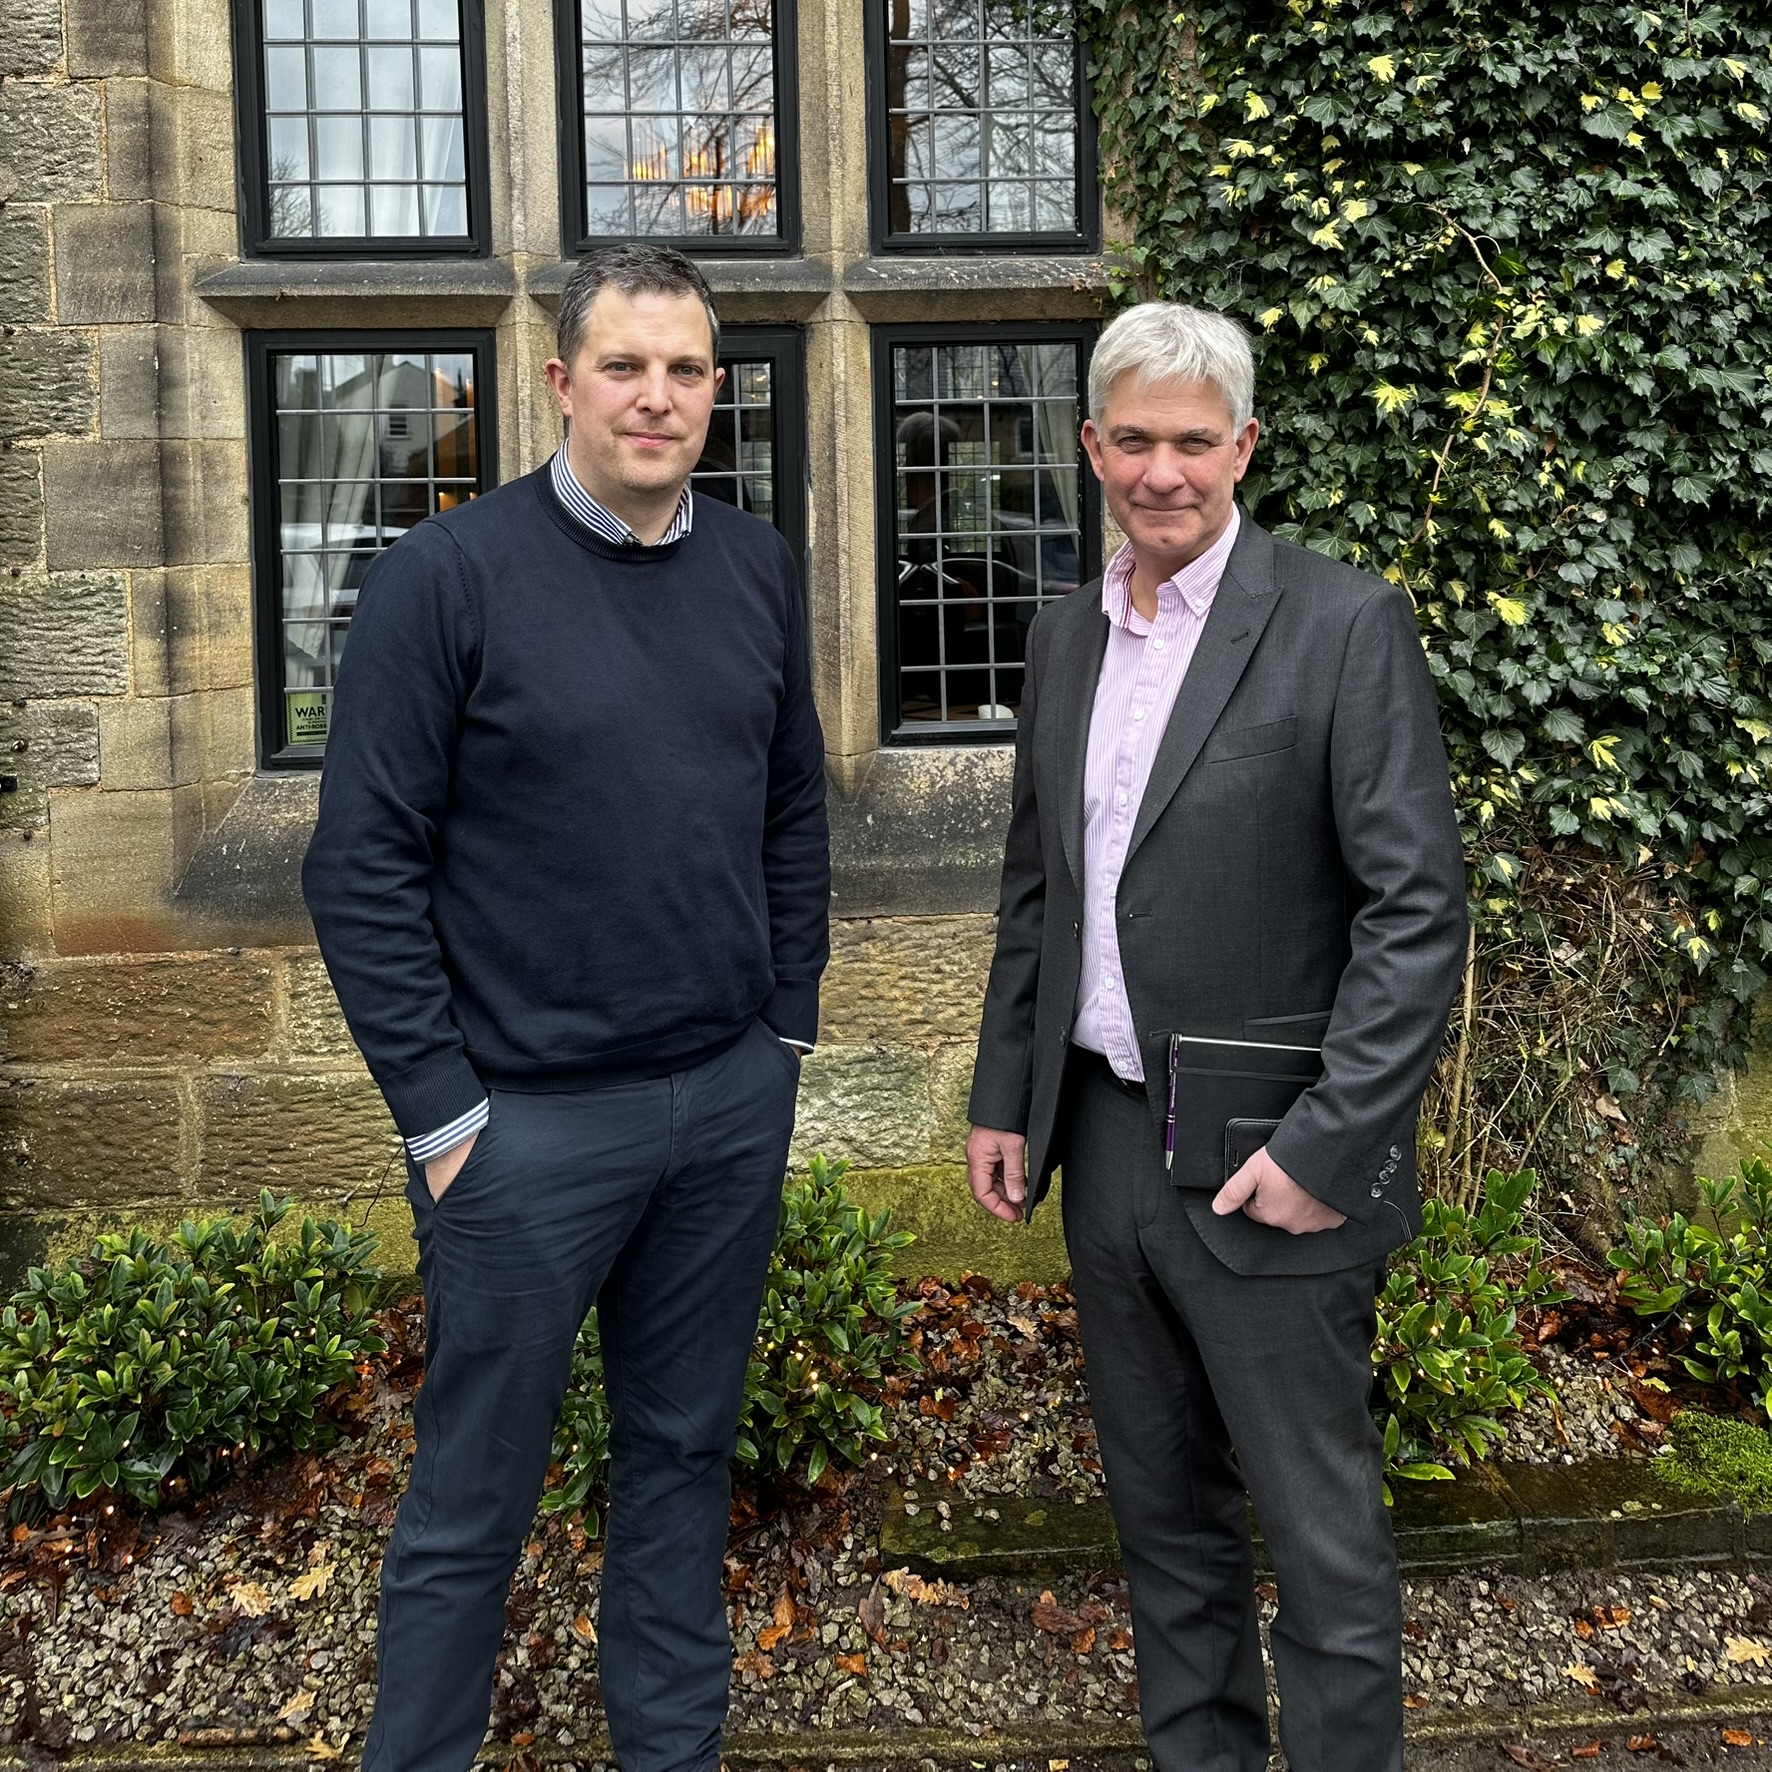 JPS and George Boyd partnership John Moss L and Brian East R JPS and George Boyd partner on kitchens and bathrooms offering